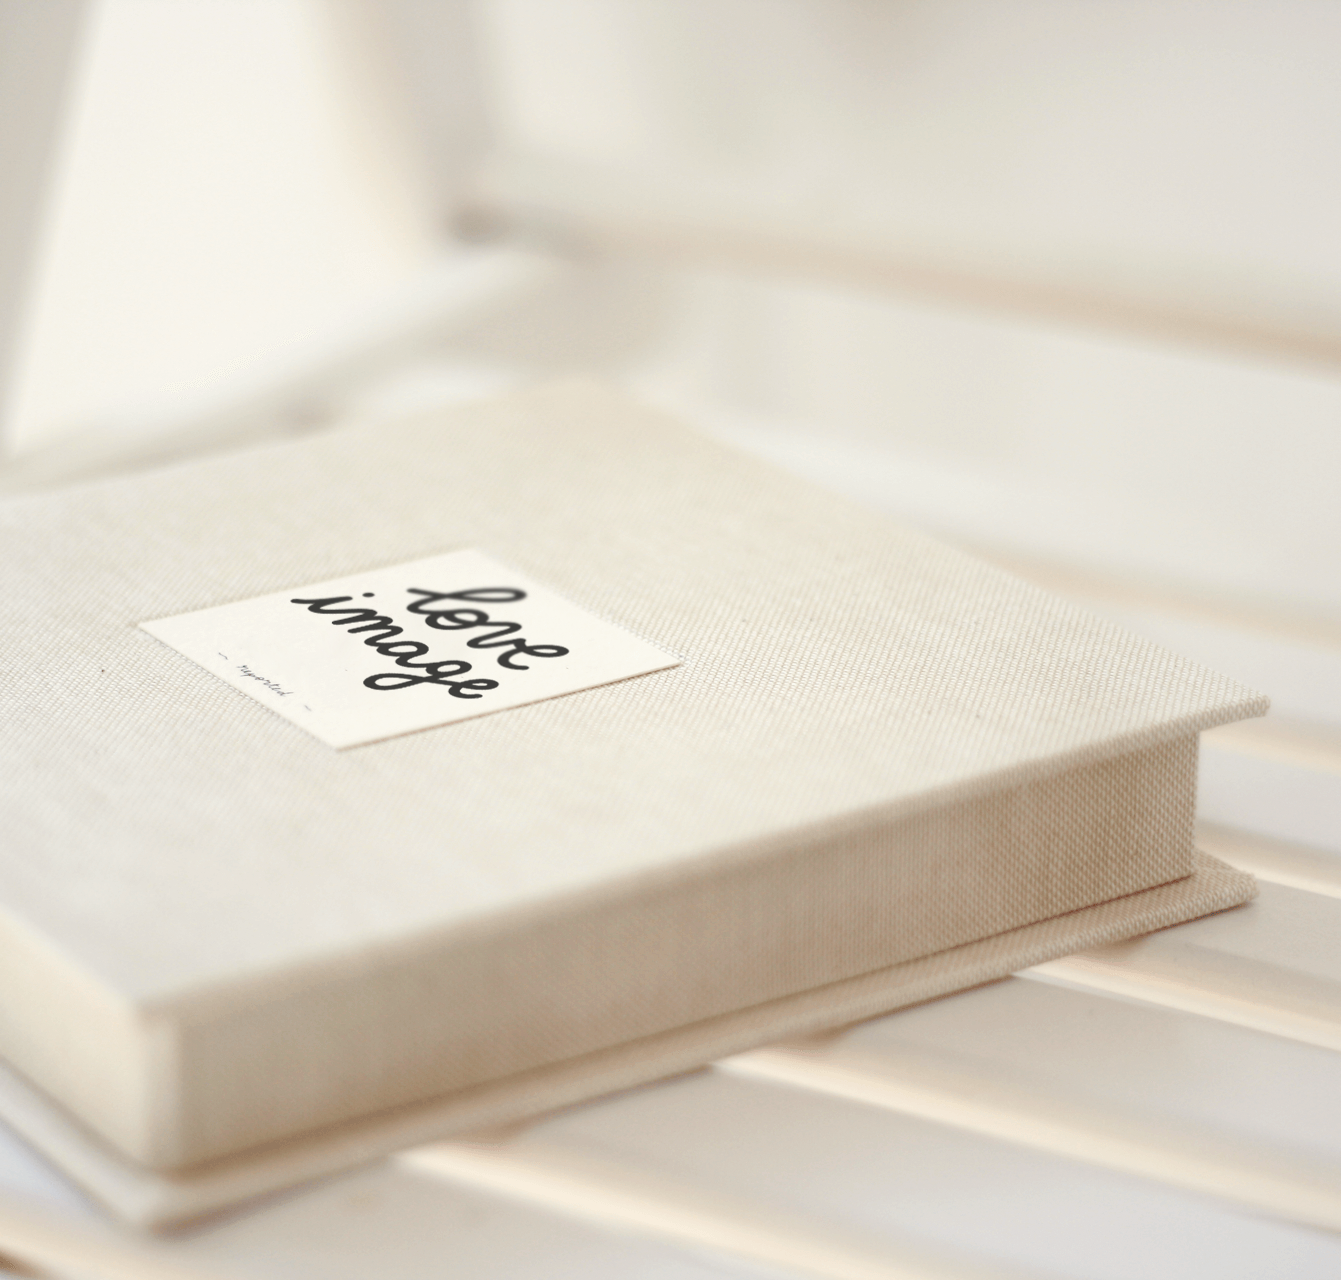 Handmade boxes in which I deliver the illustrated reportage